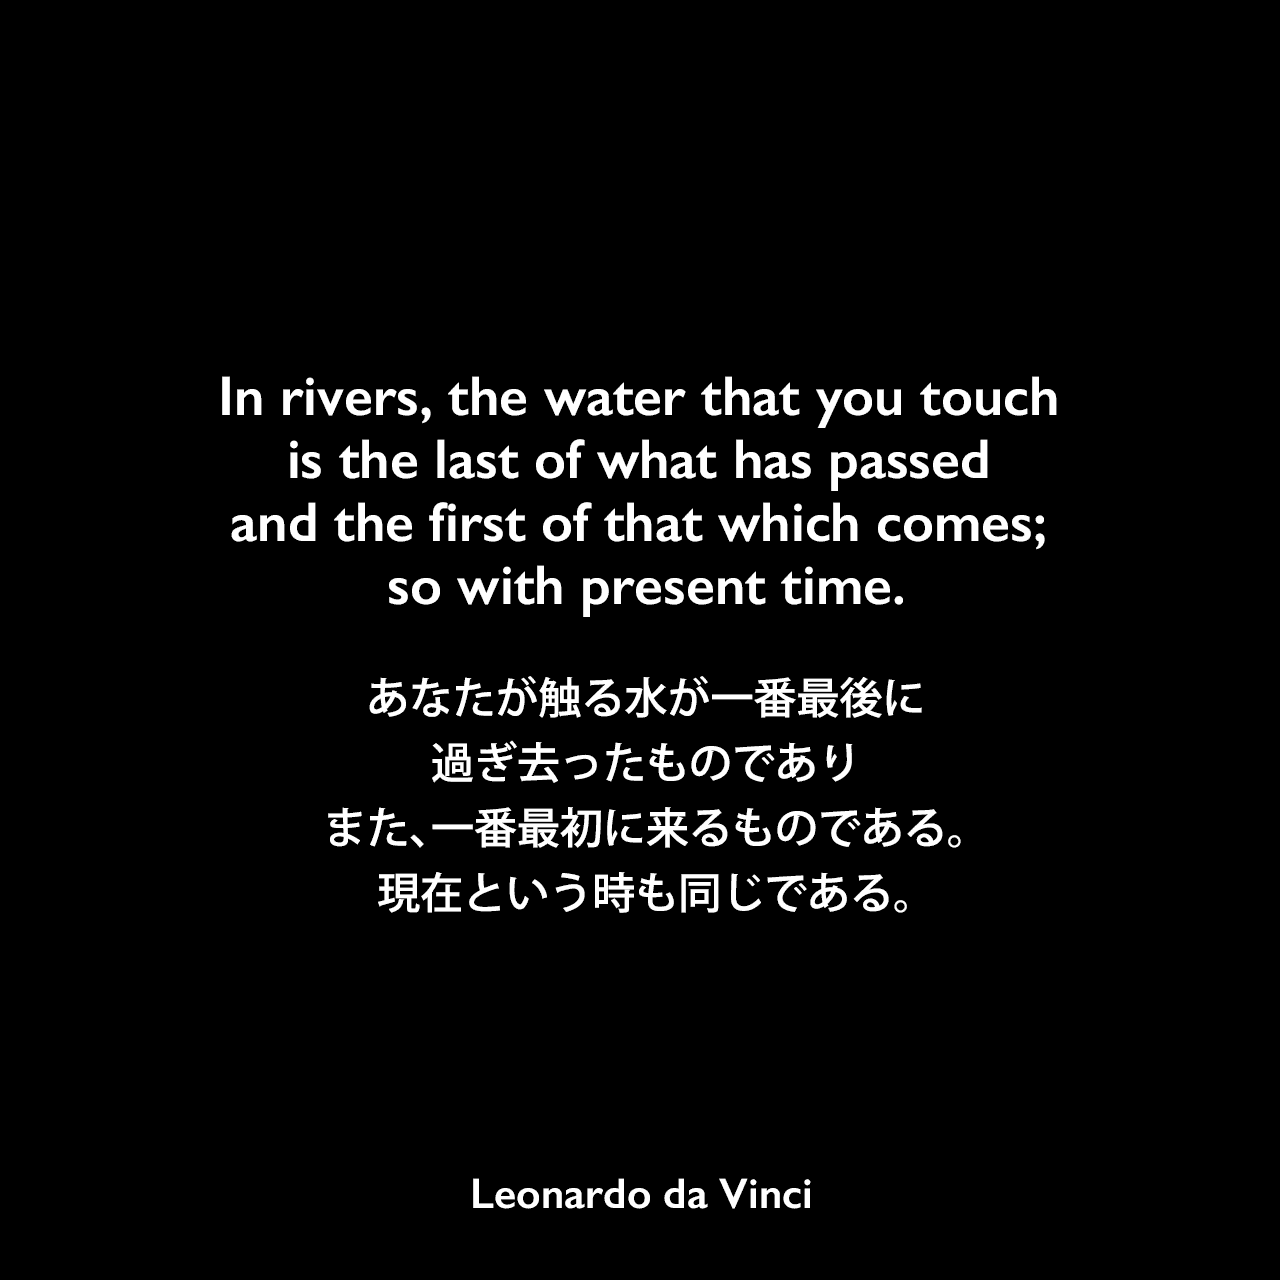 In rivers, the water that you touch is the last of what has passed and the first of that which comes; so with present time.あなたが触る水が一番最後に過ぎ去ったものであり、また、一番最初に来るものである。現在という時も同じである。Leonardo da Vinci